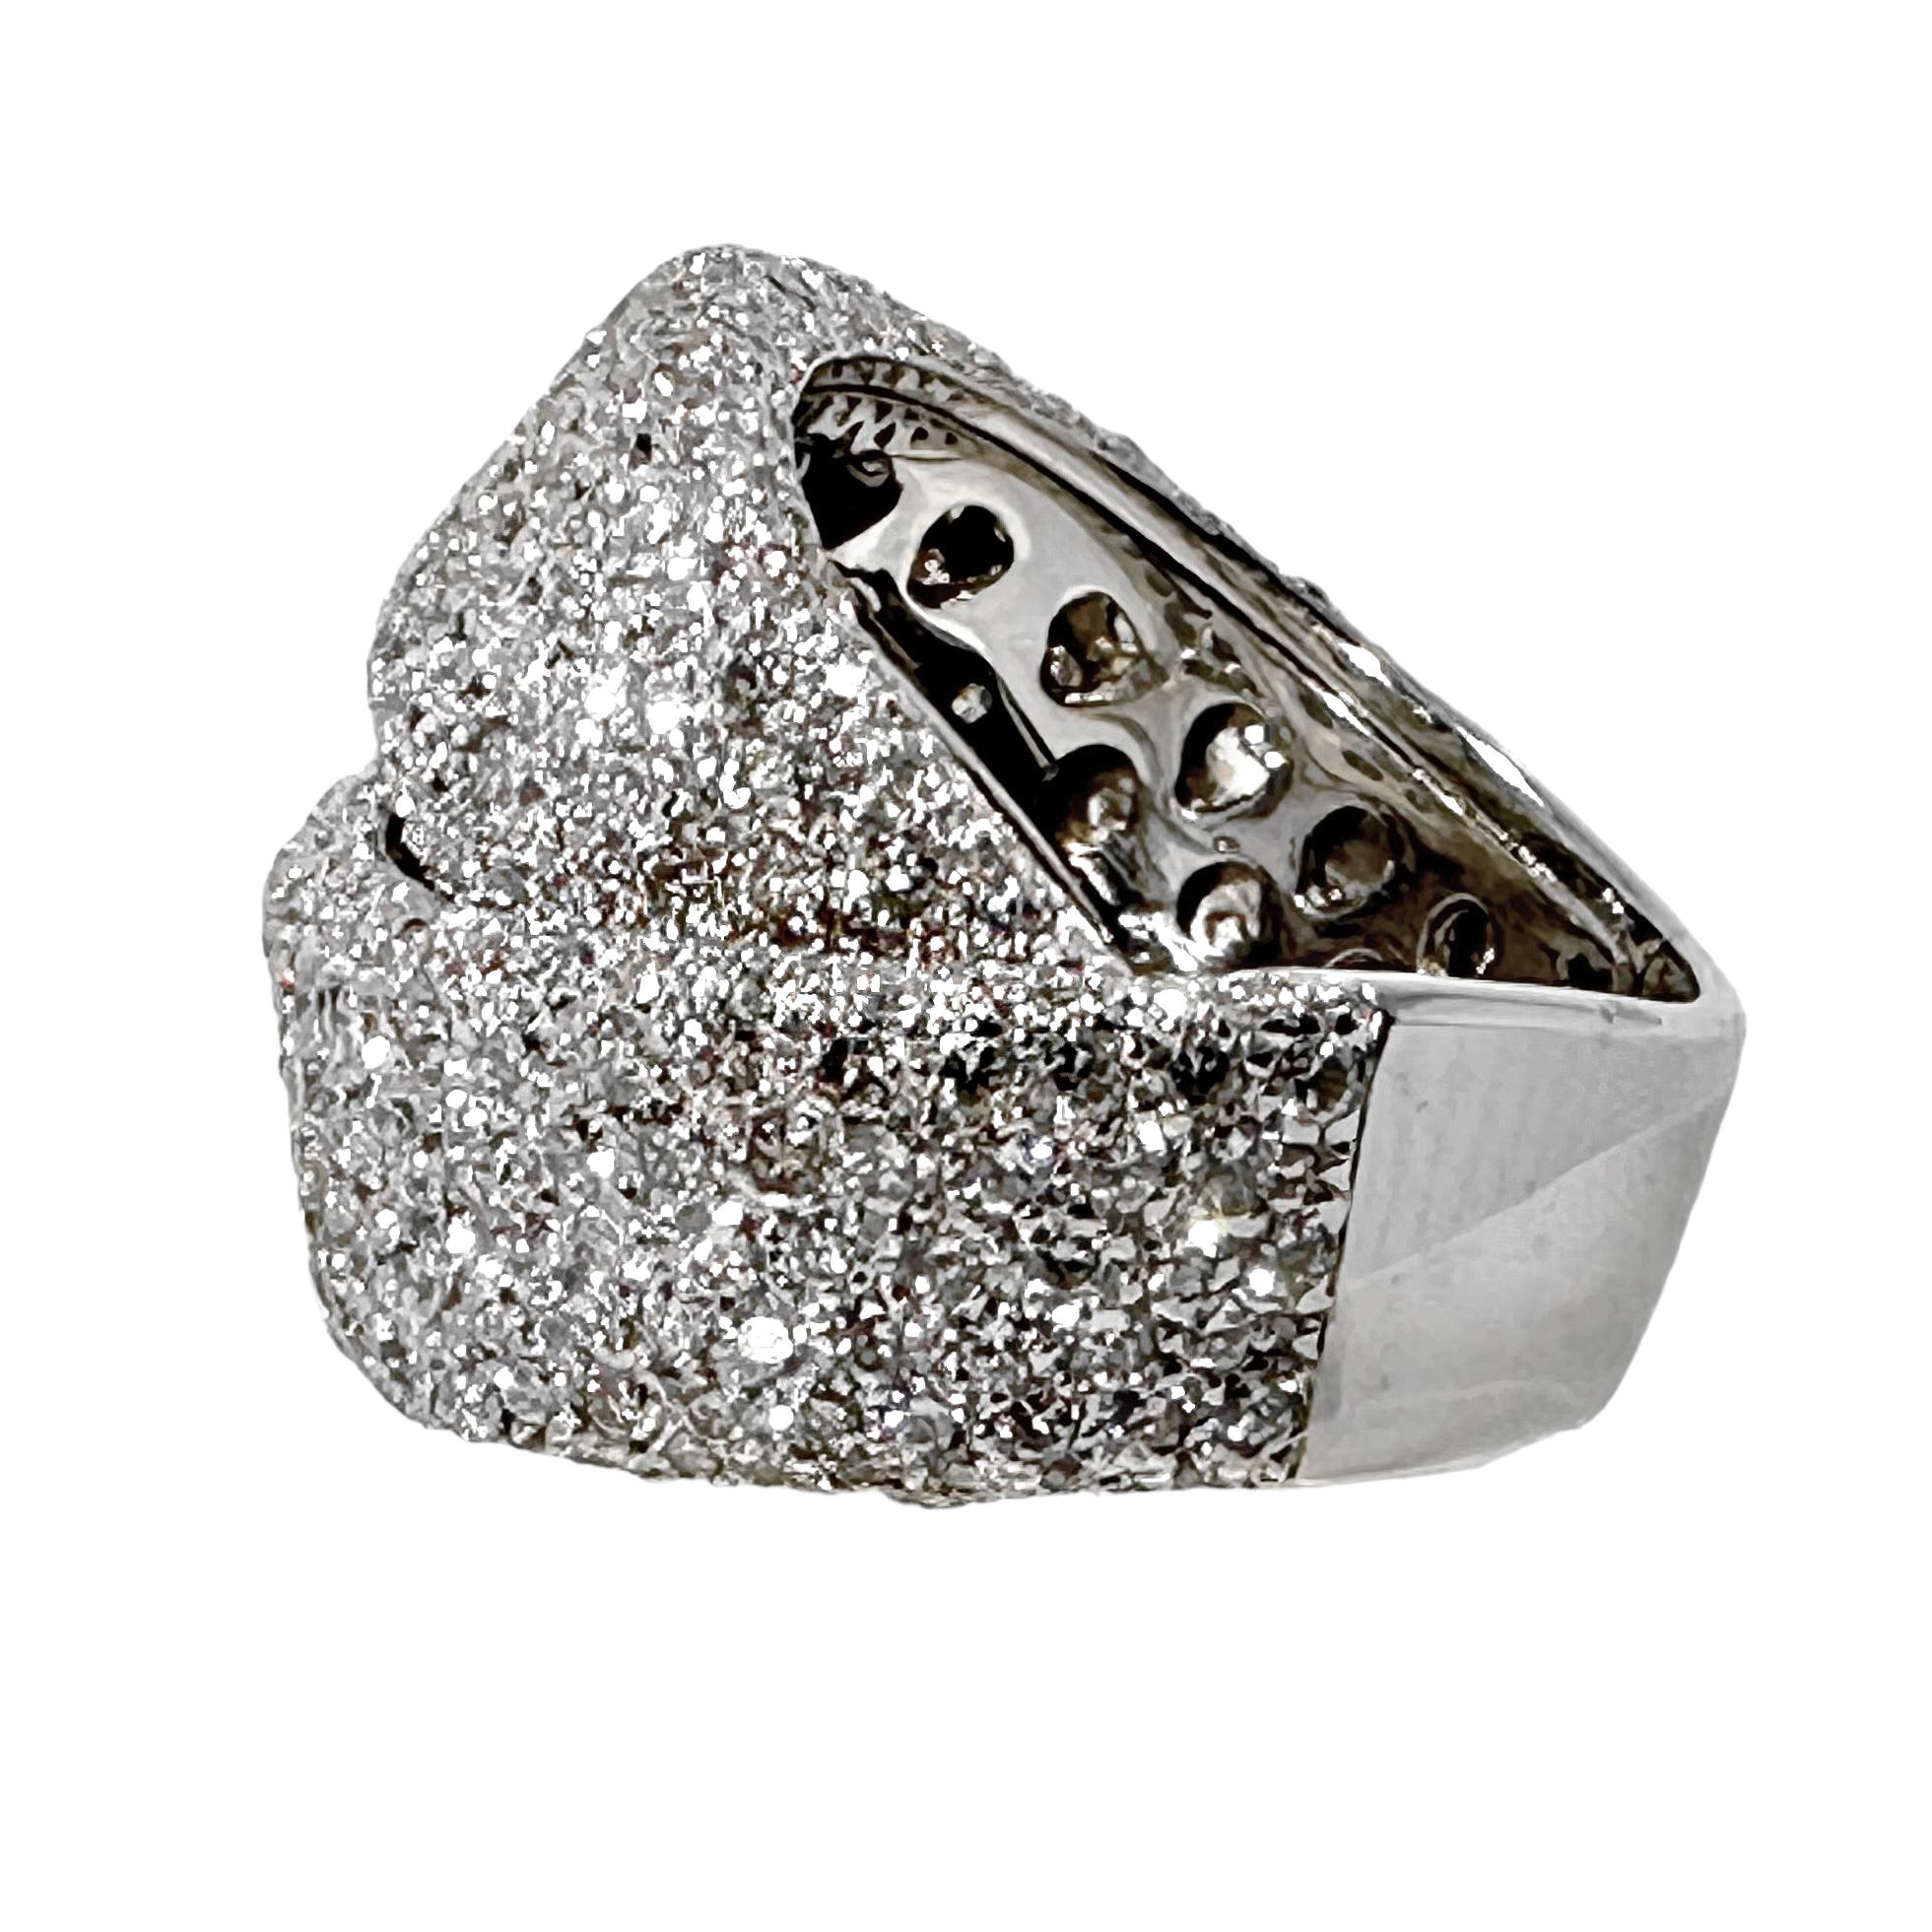 Luxurious 18K White Gold & Diamond Encrusted Bypass Dome Ring with Italian Flair In Good Condition For Sale In Palm Beach, FL